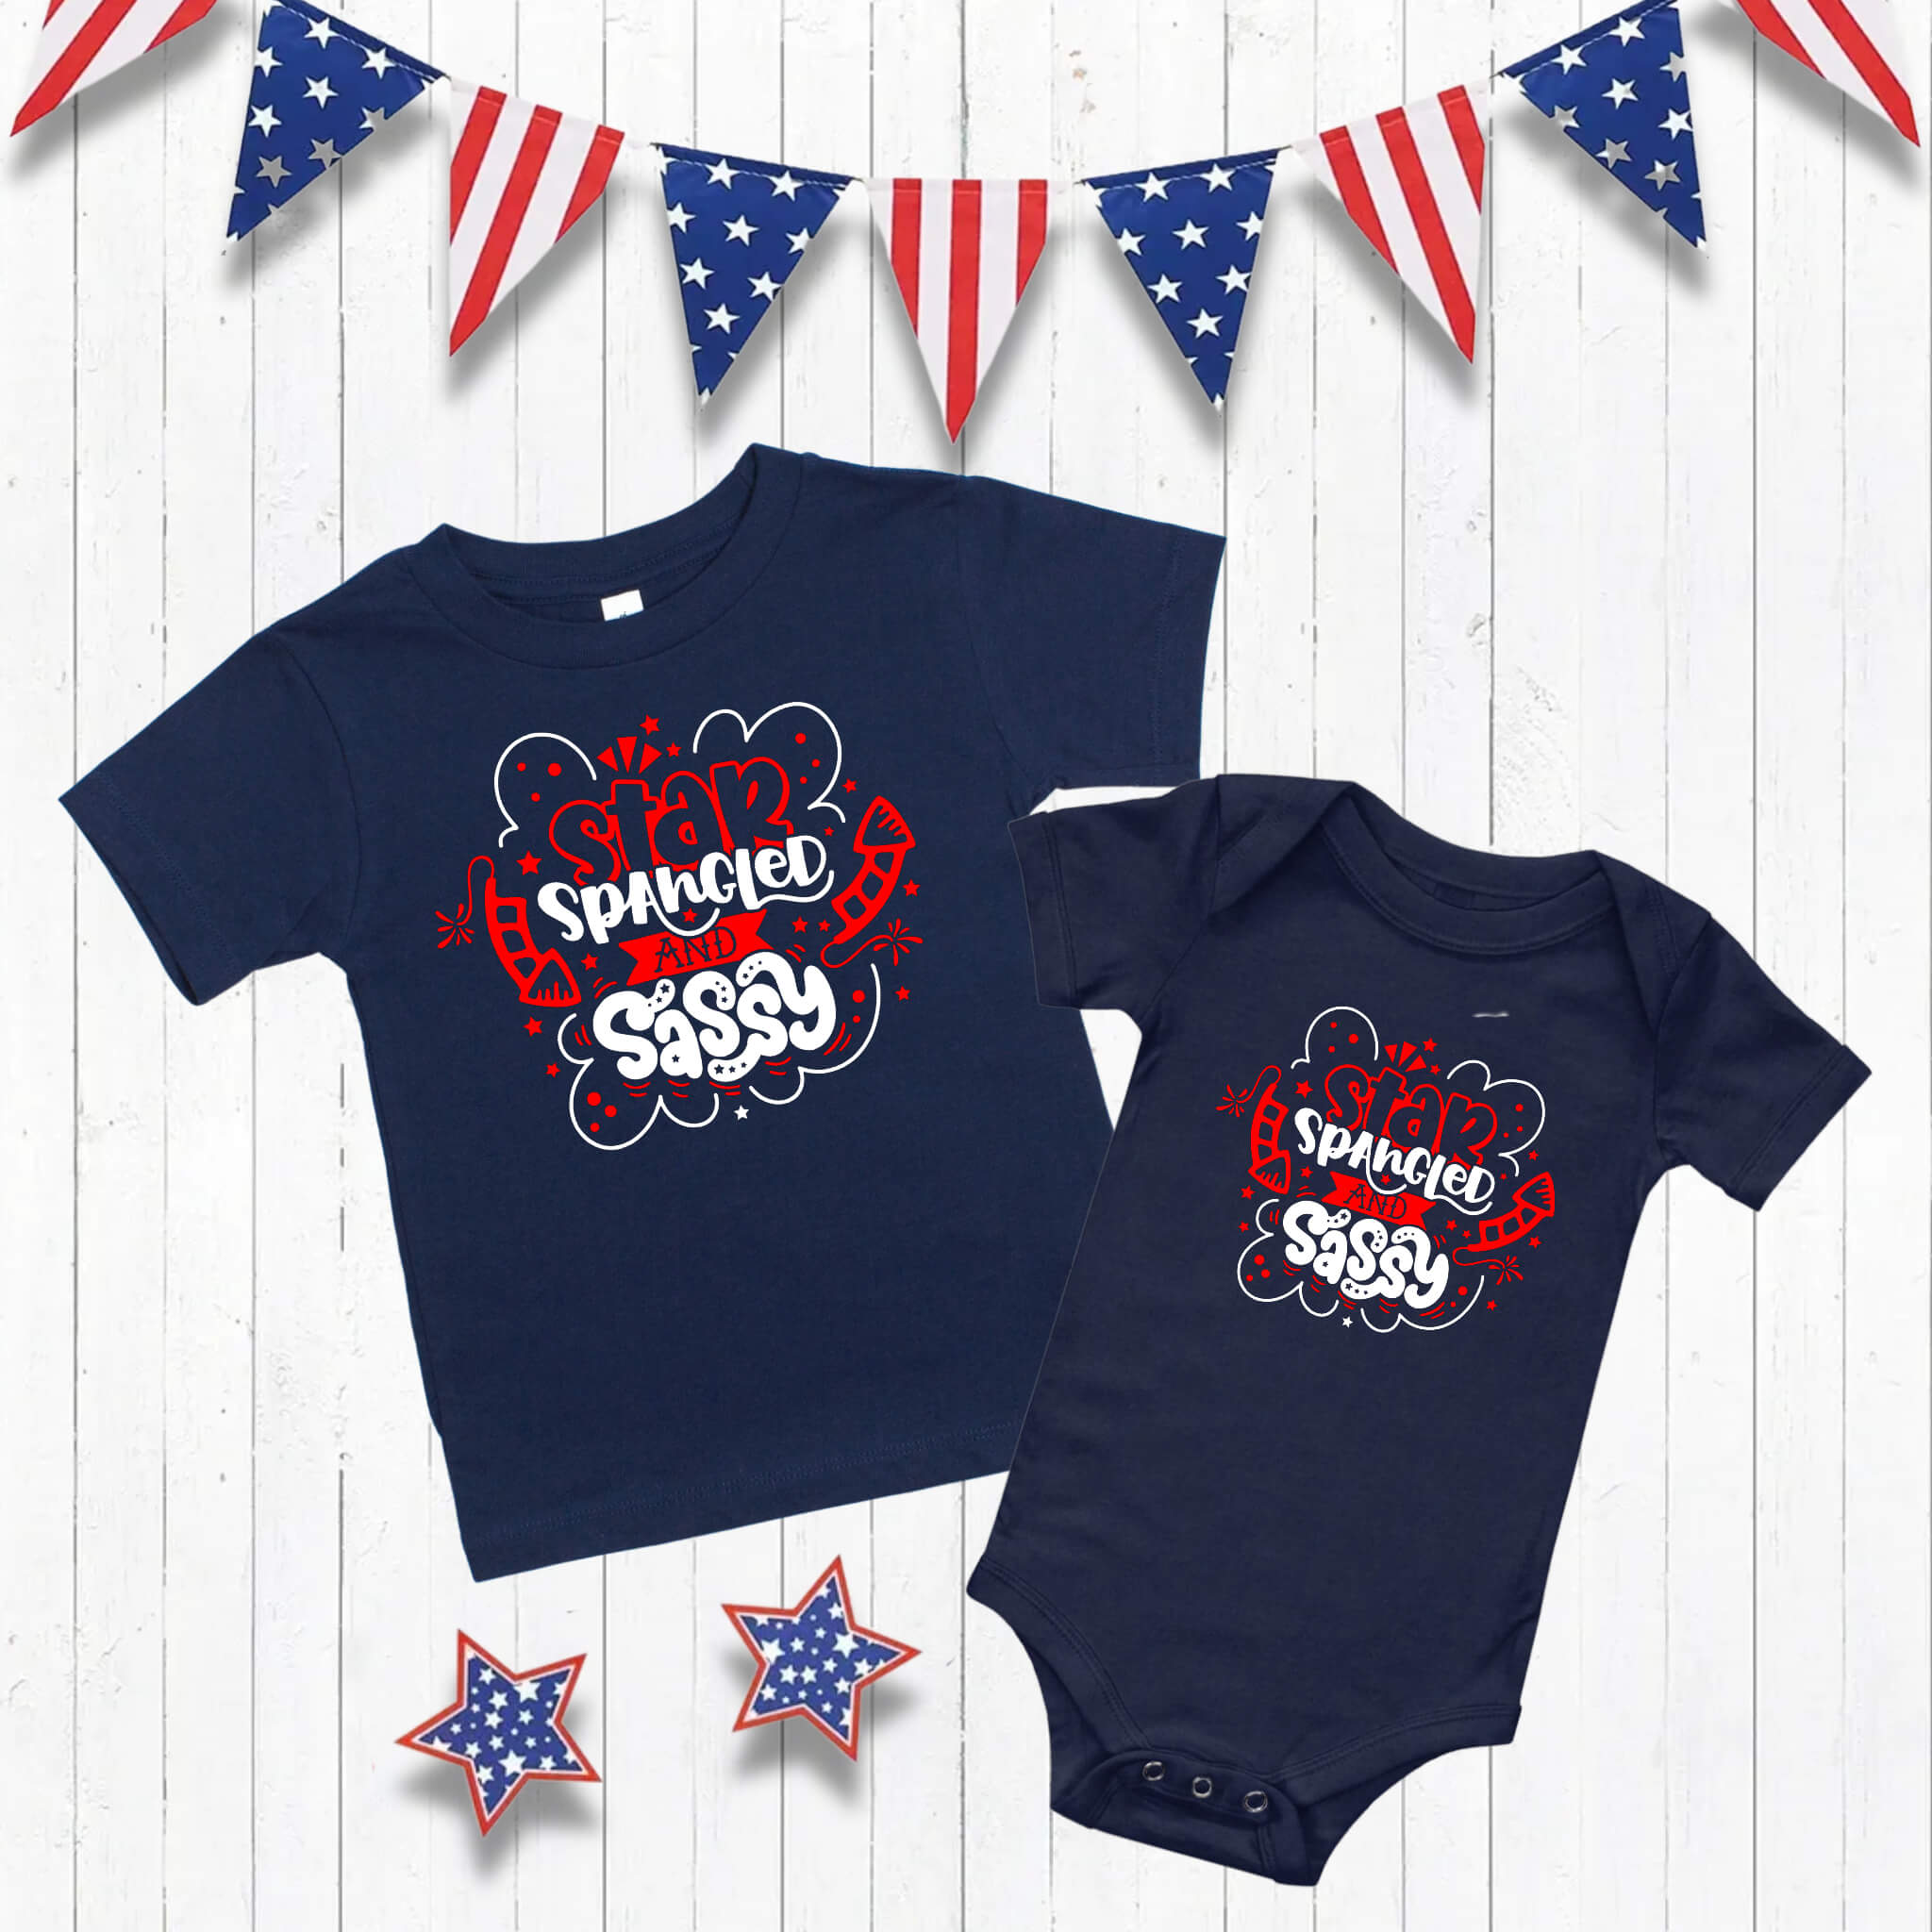 4th of July – Star Spangled & Sassy Patriotic Girl’s Graphic Print Onesie / T-Shirt